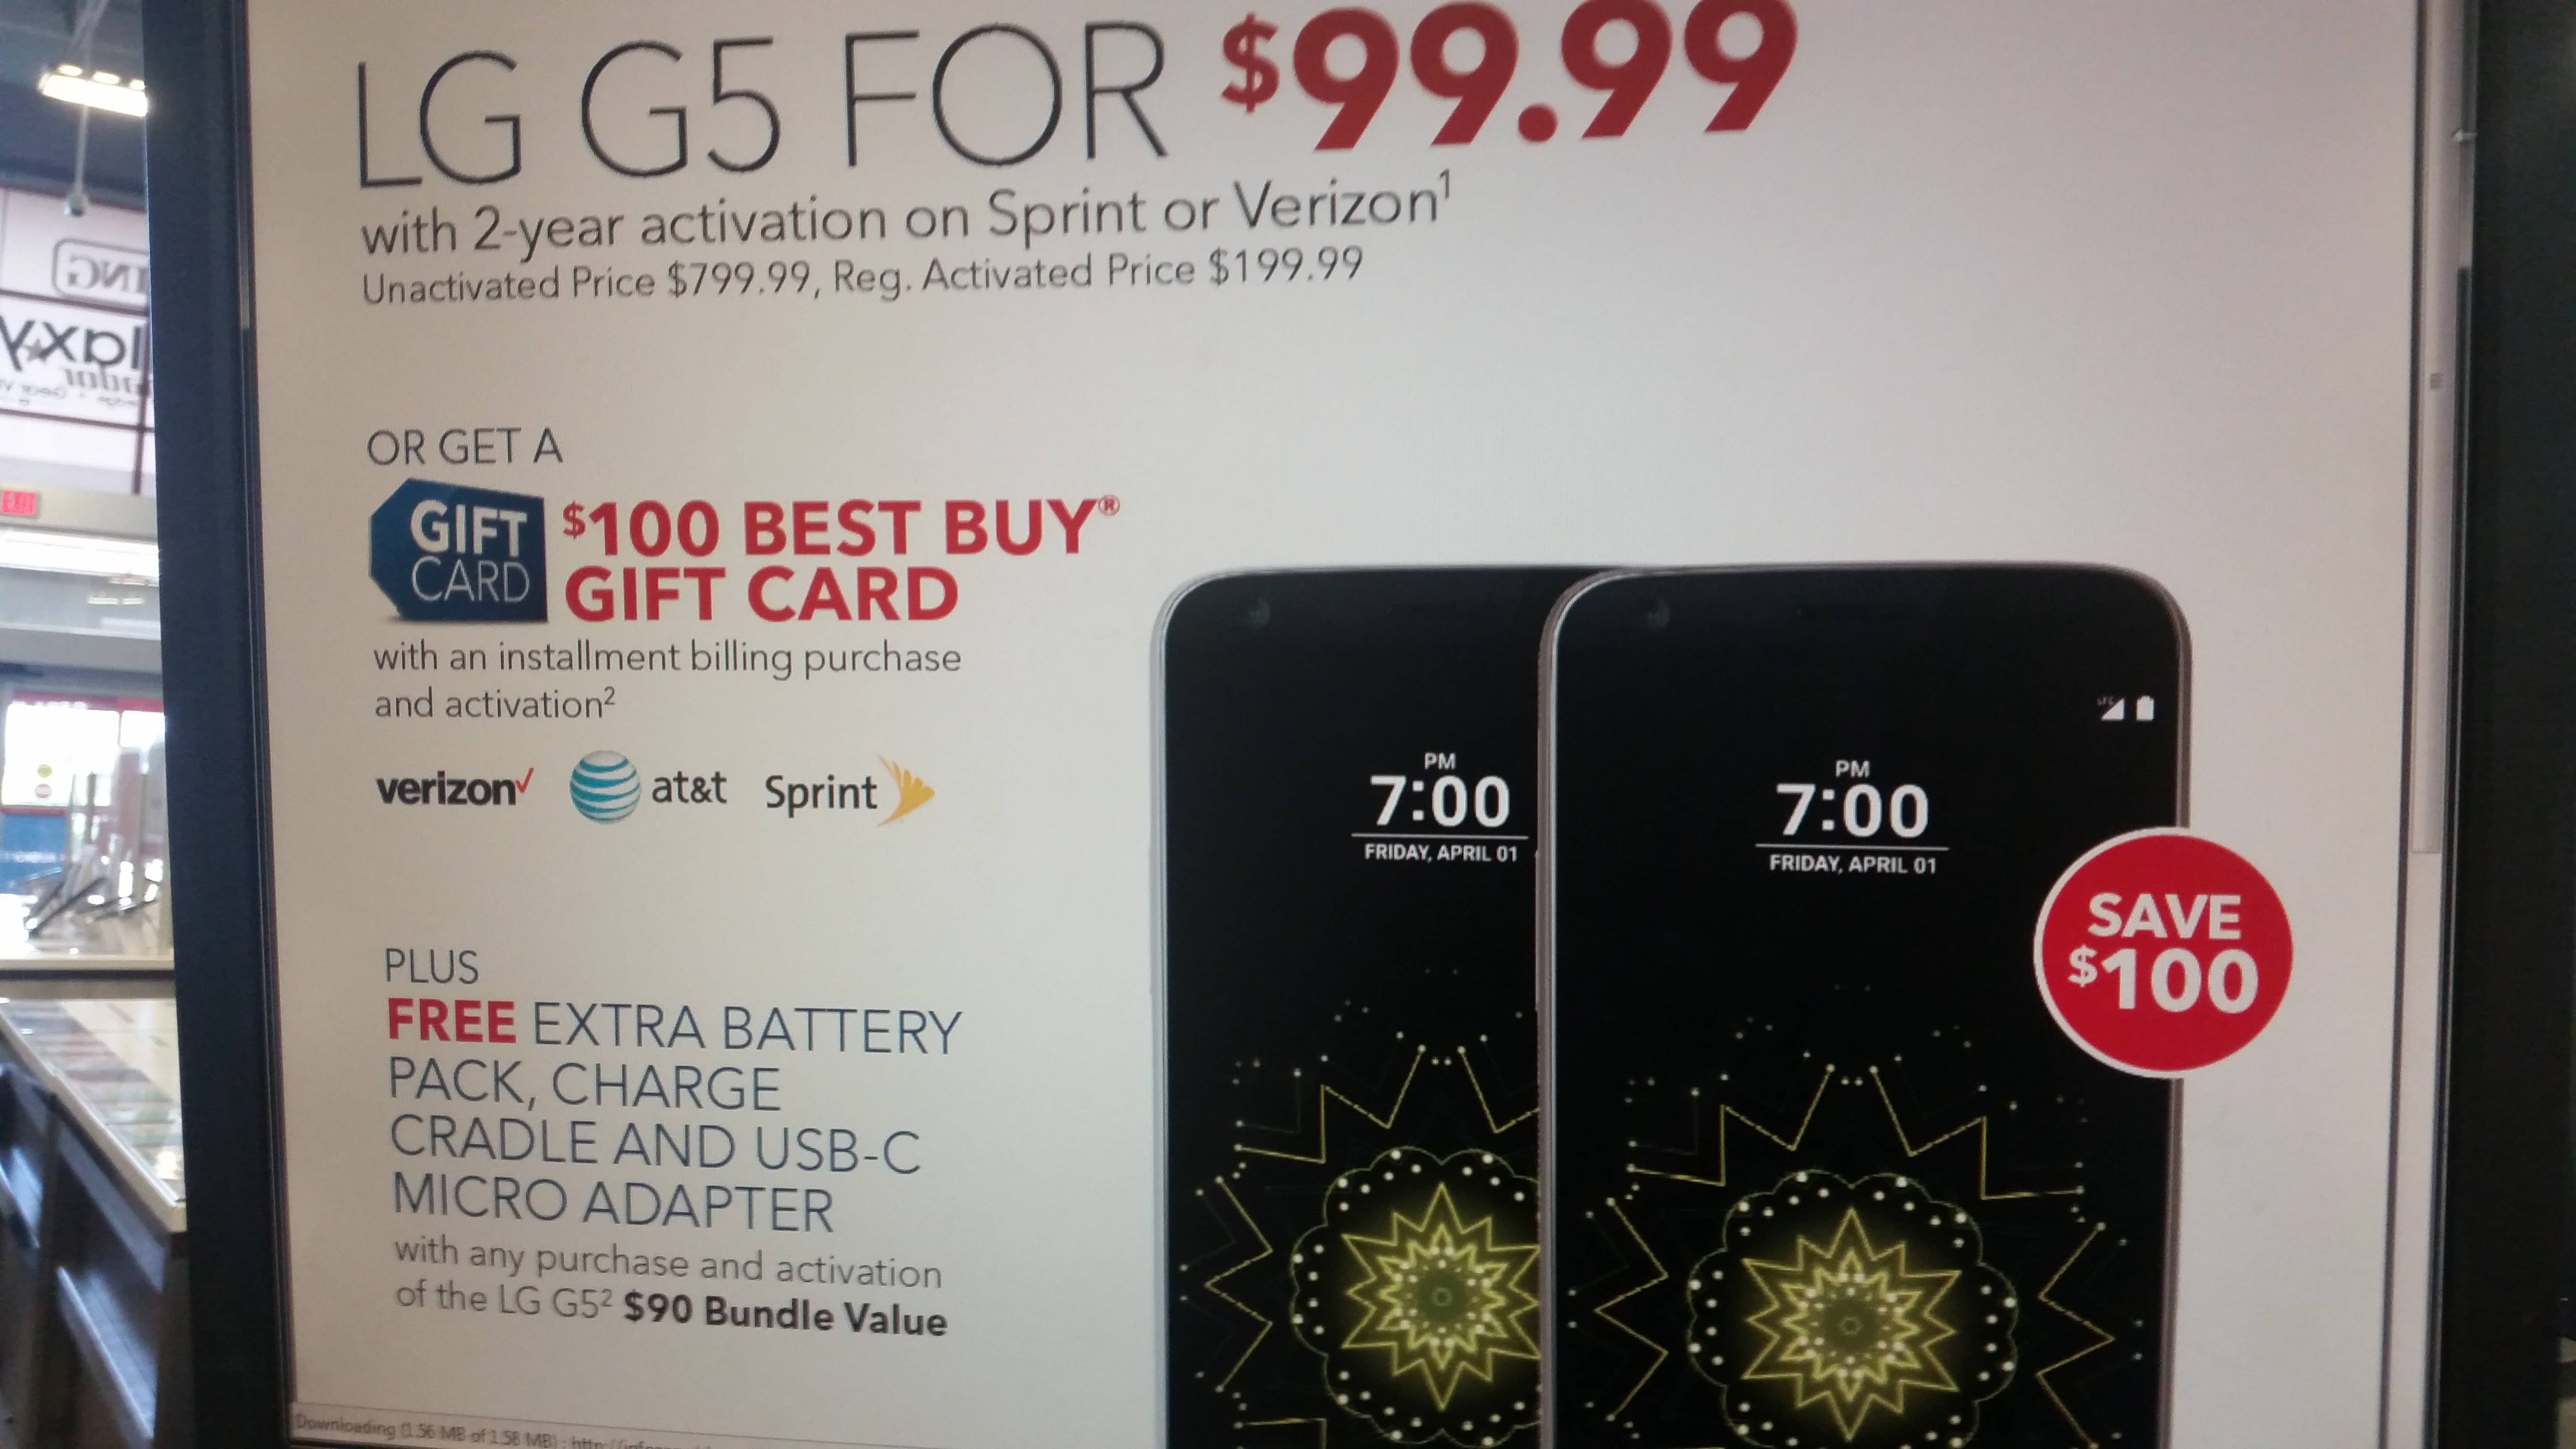 Best Buy's LG G5 offers as pictured by Reddit user 'BlueShirted' - LG G5 launches globally on March 31, Best Buy offers and carrier pre-orders revealed as well